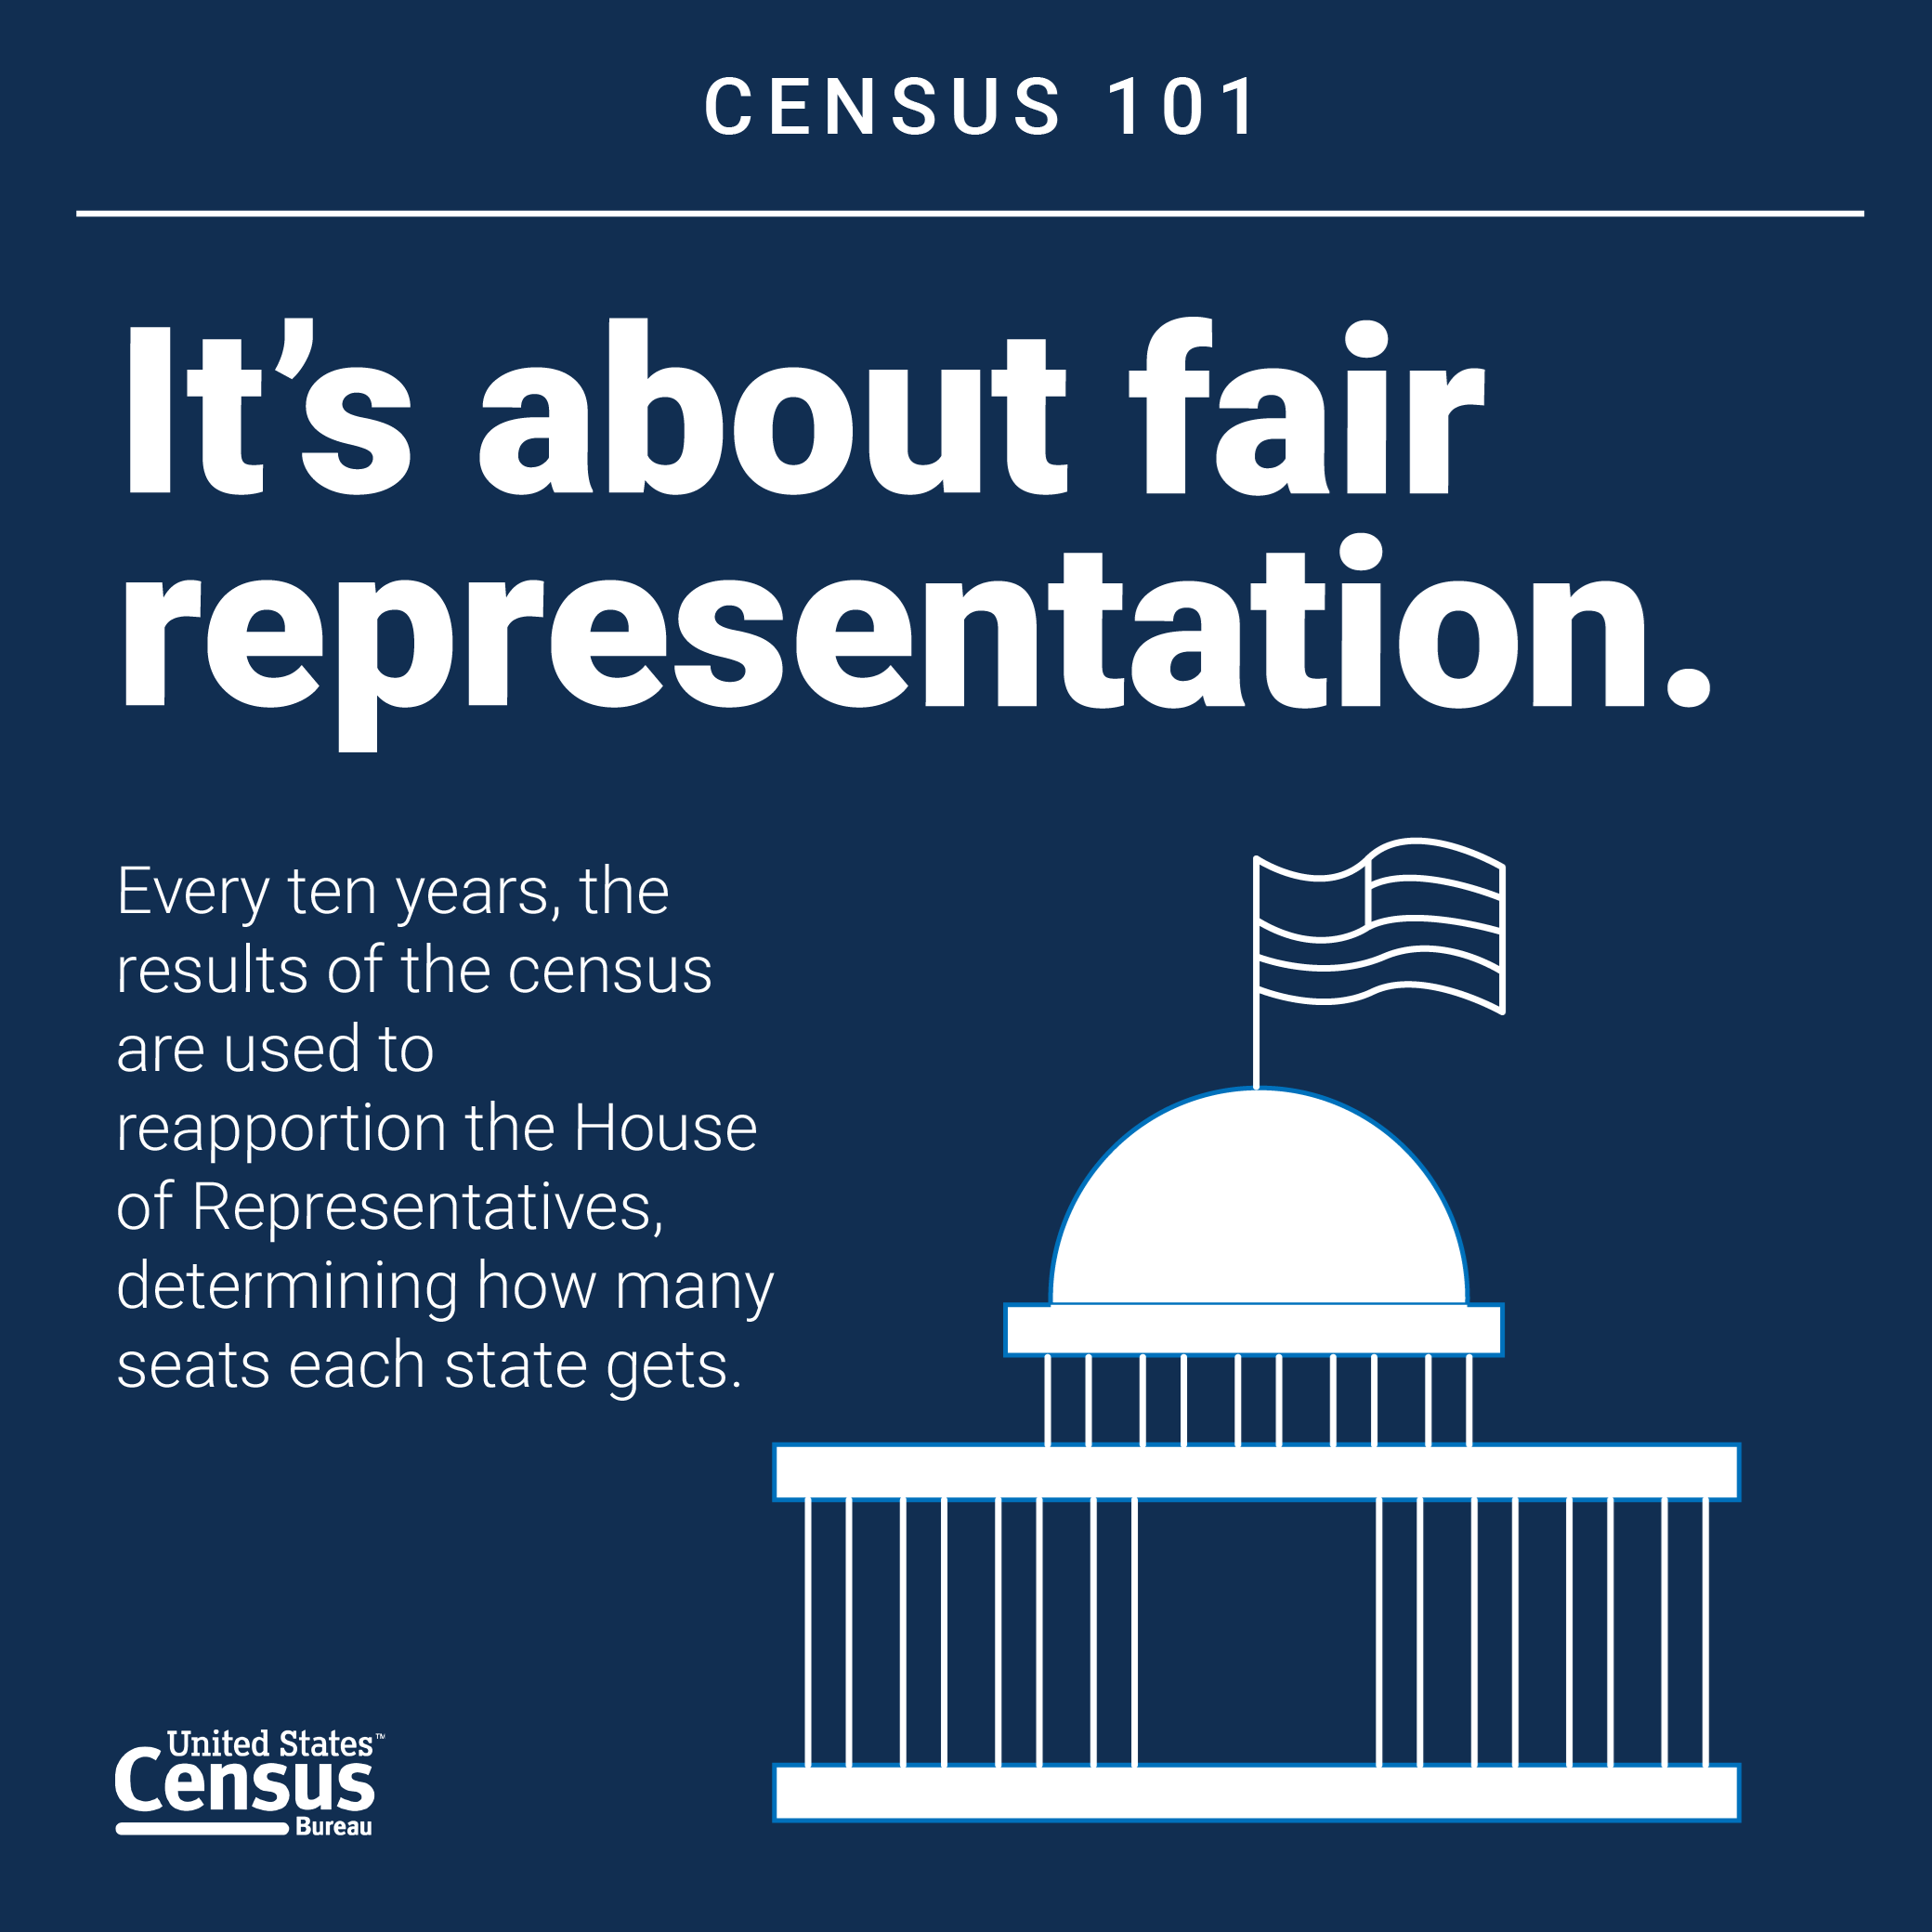 Dallas County Counts 2020 Details Efforts to Ensure Participation in U.S. Census